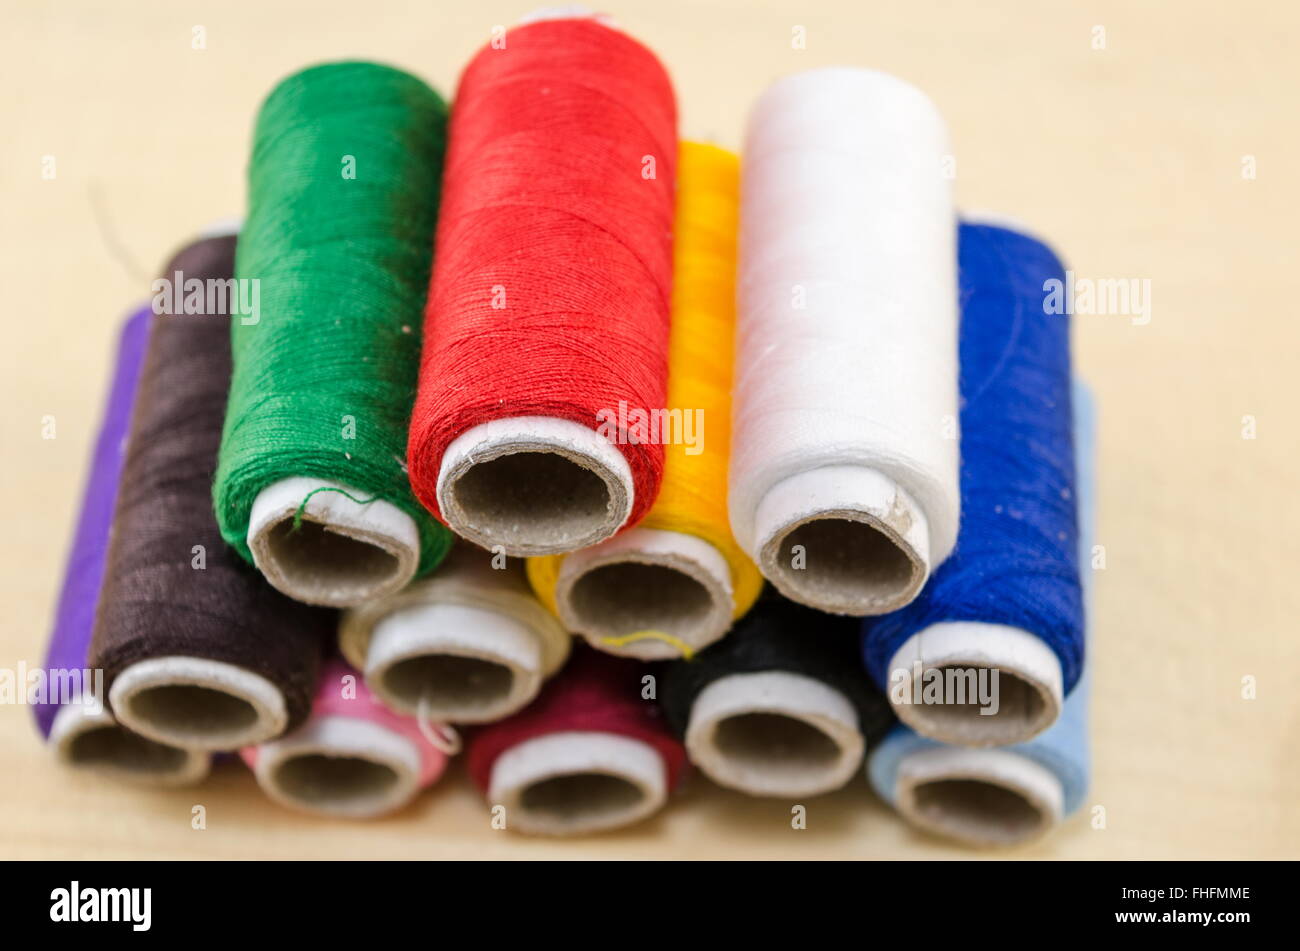 Sewing thread in various colors on a pile Stock Photo